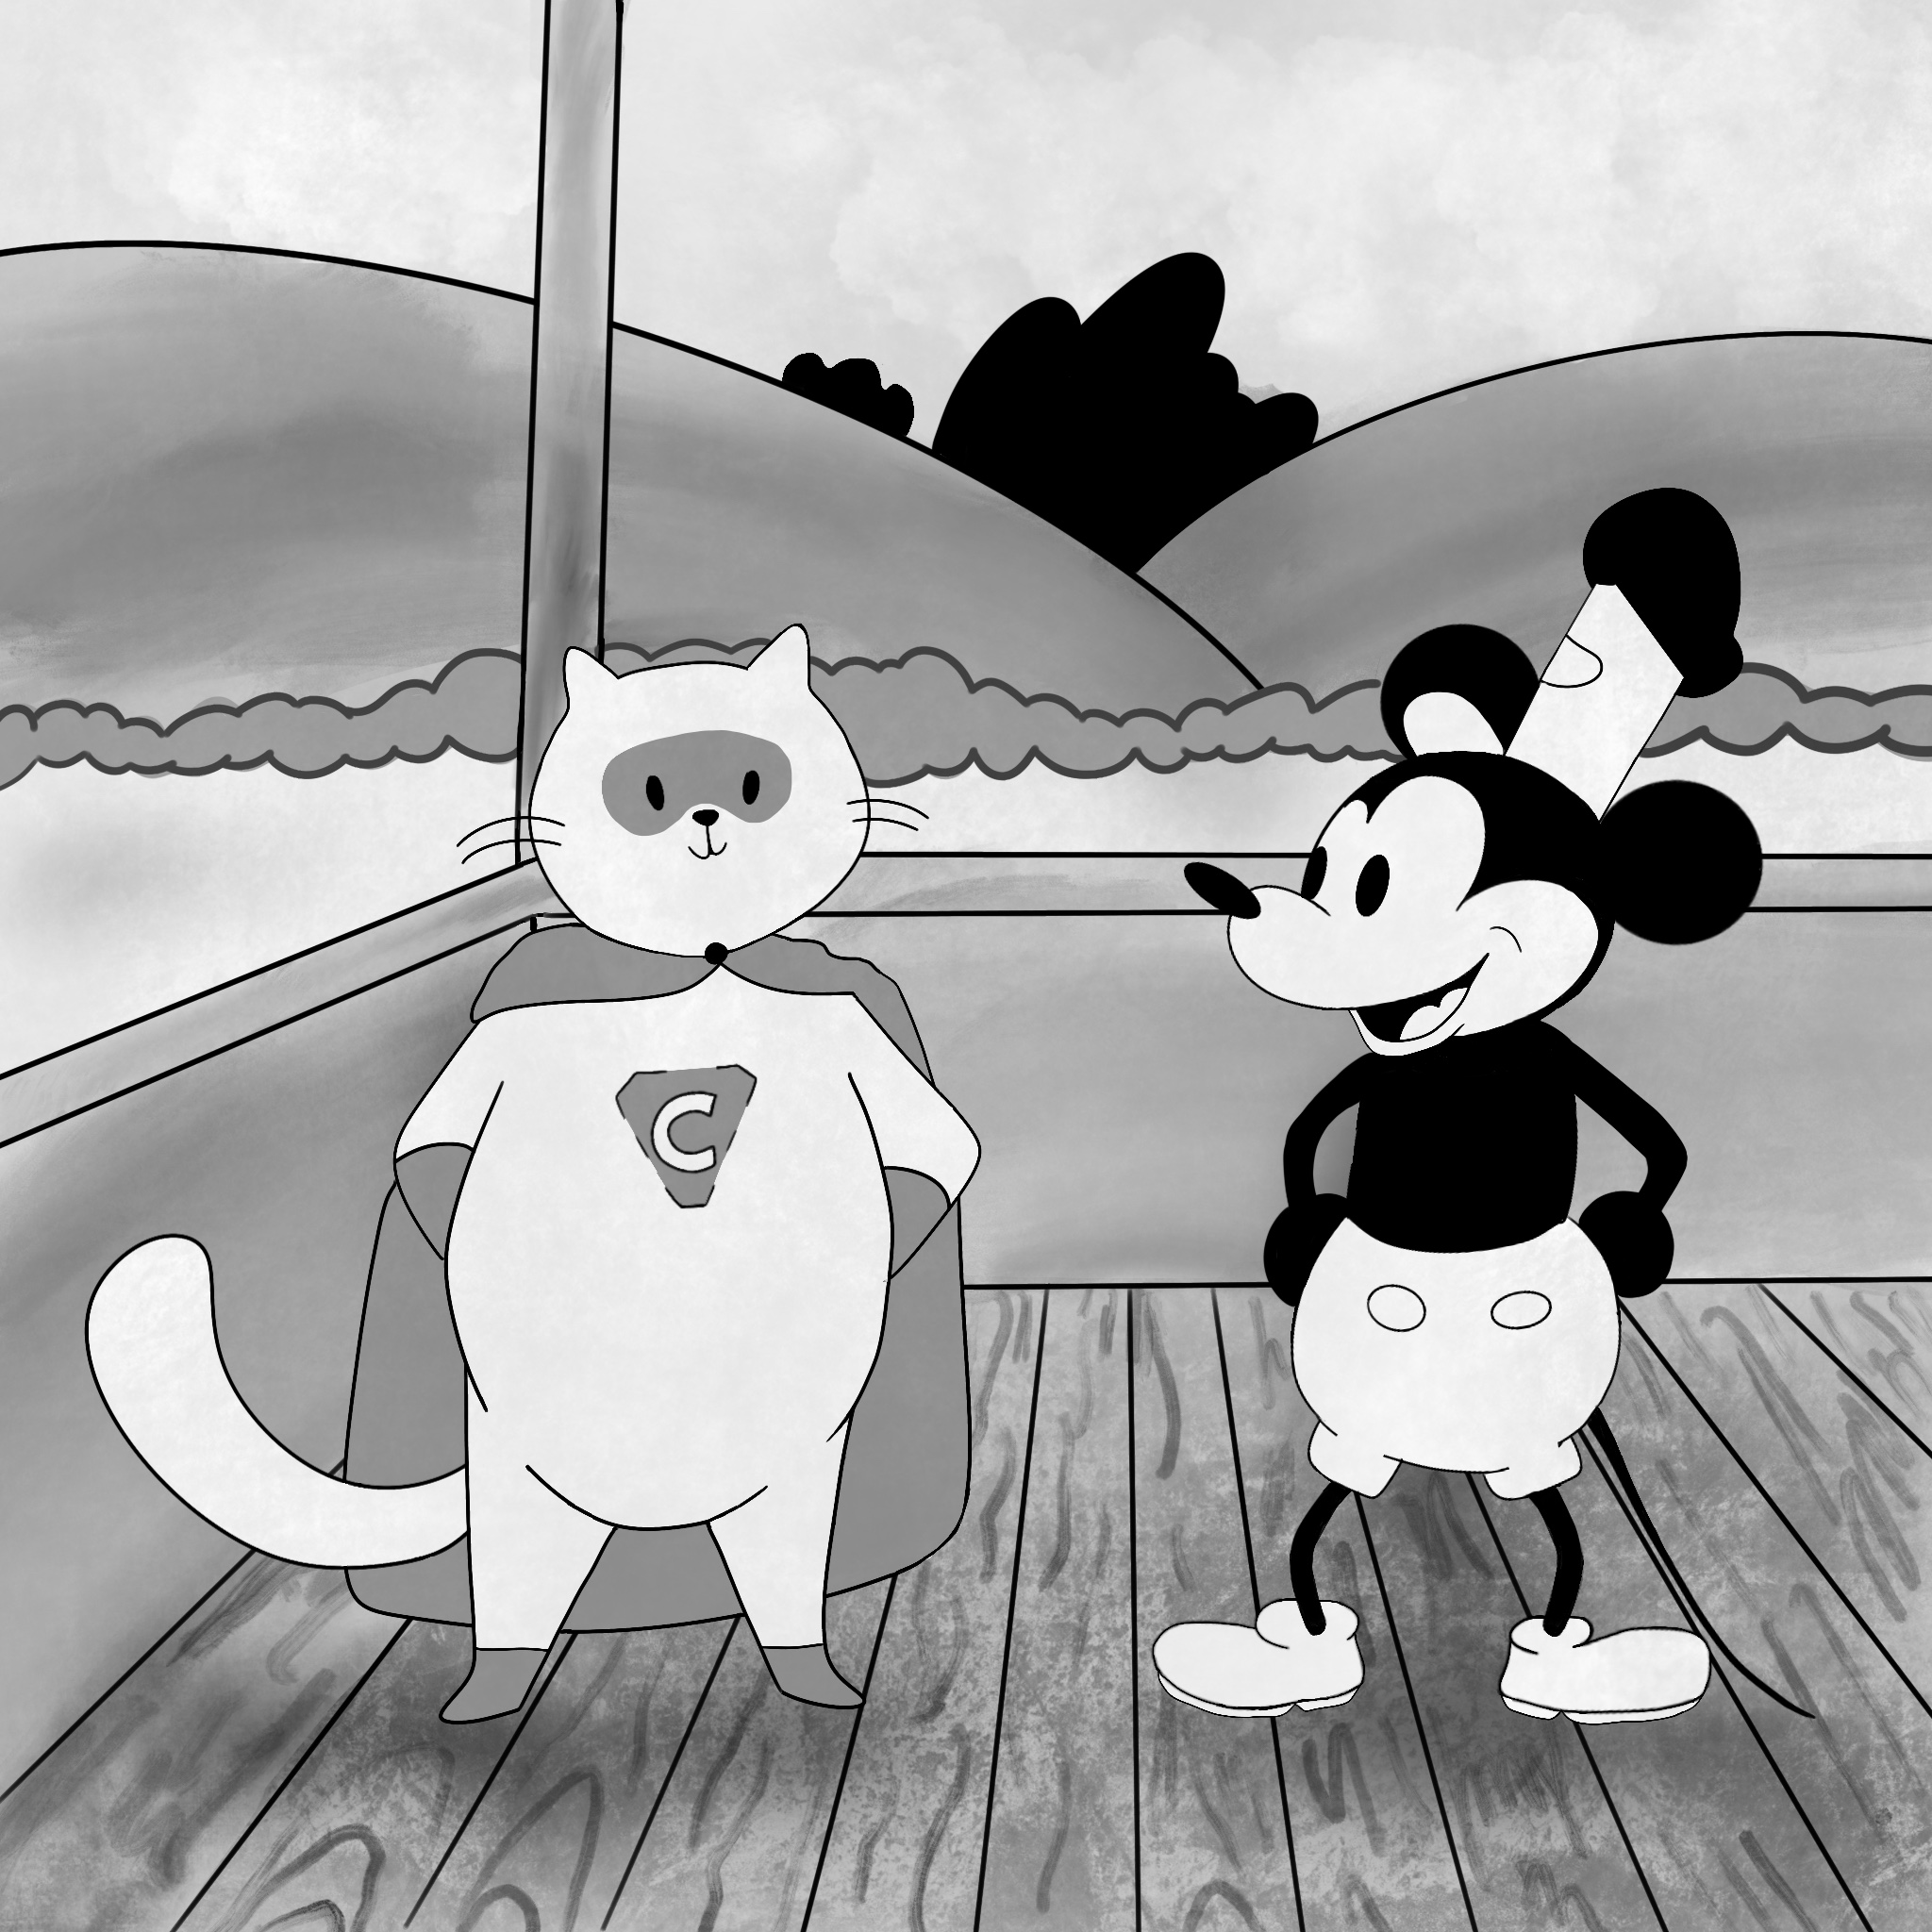 Hero Cat and Steamboat Willie on a boat